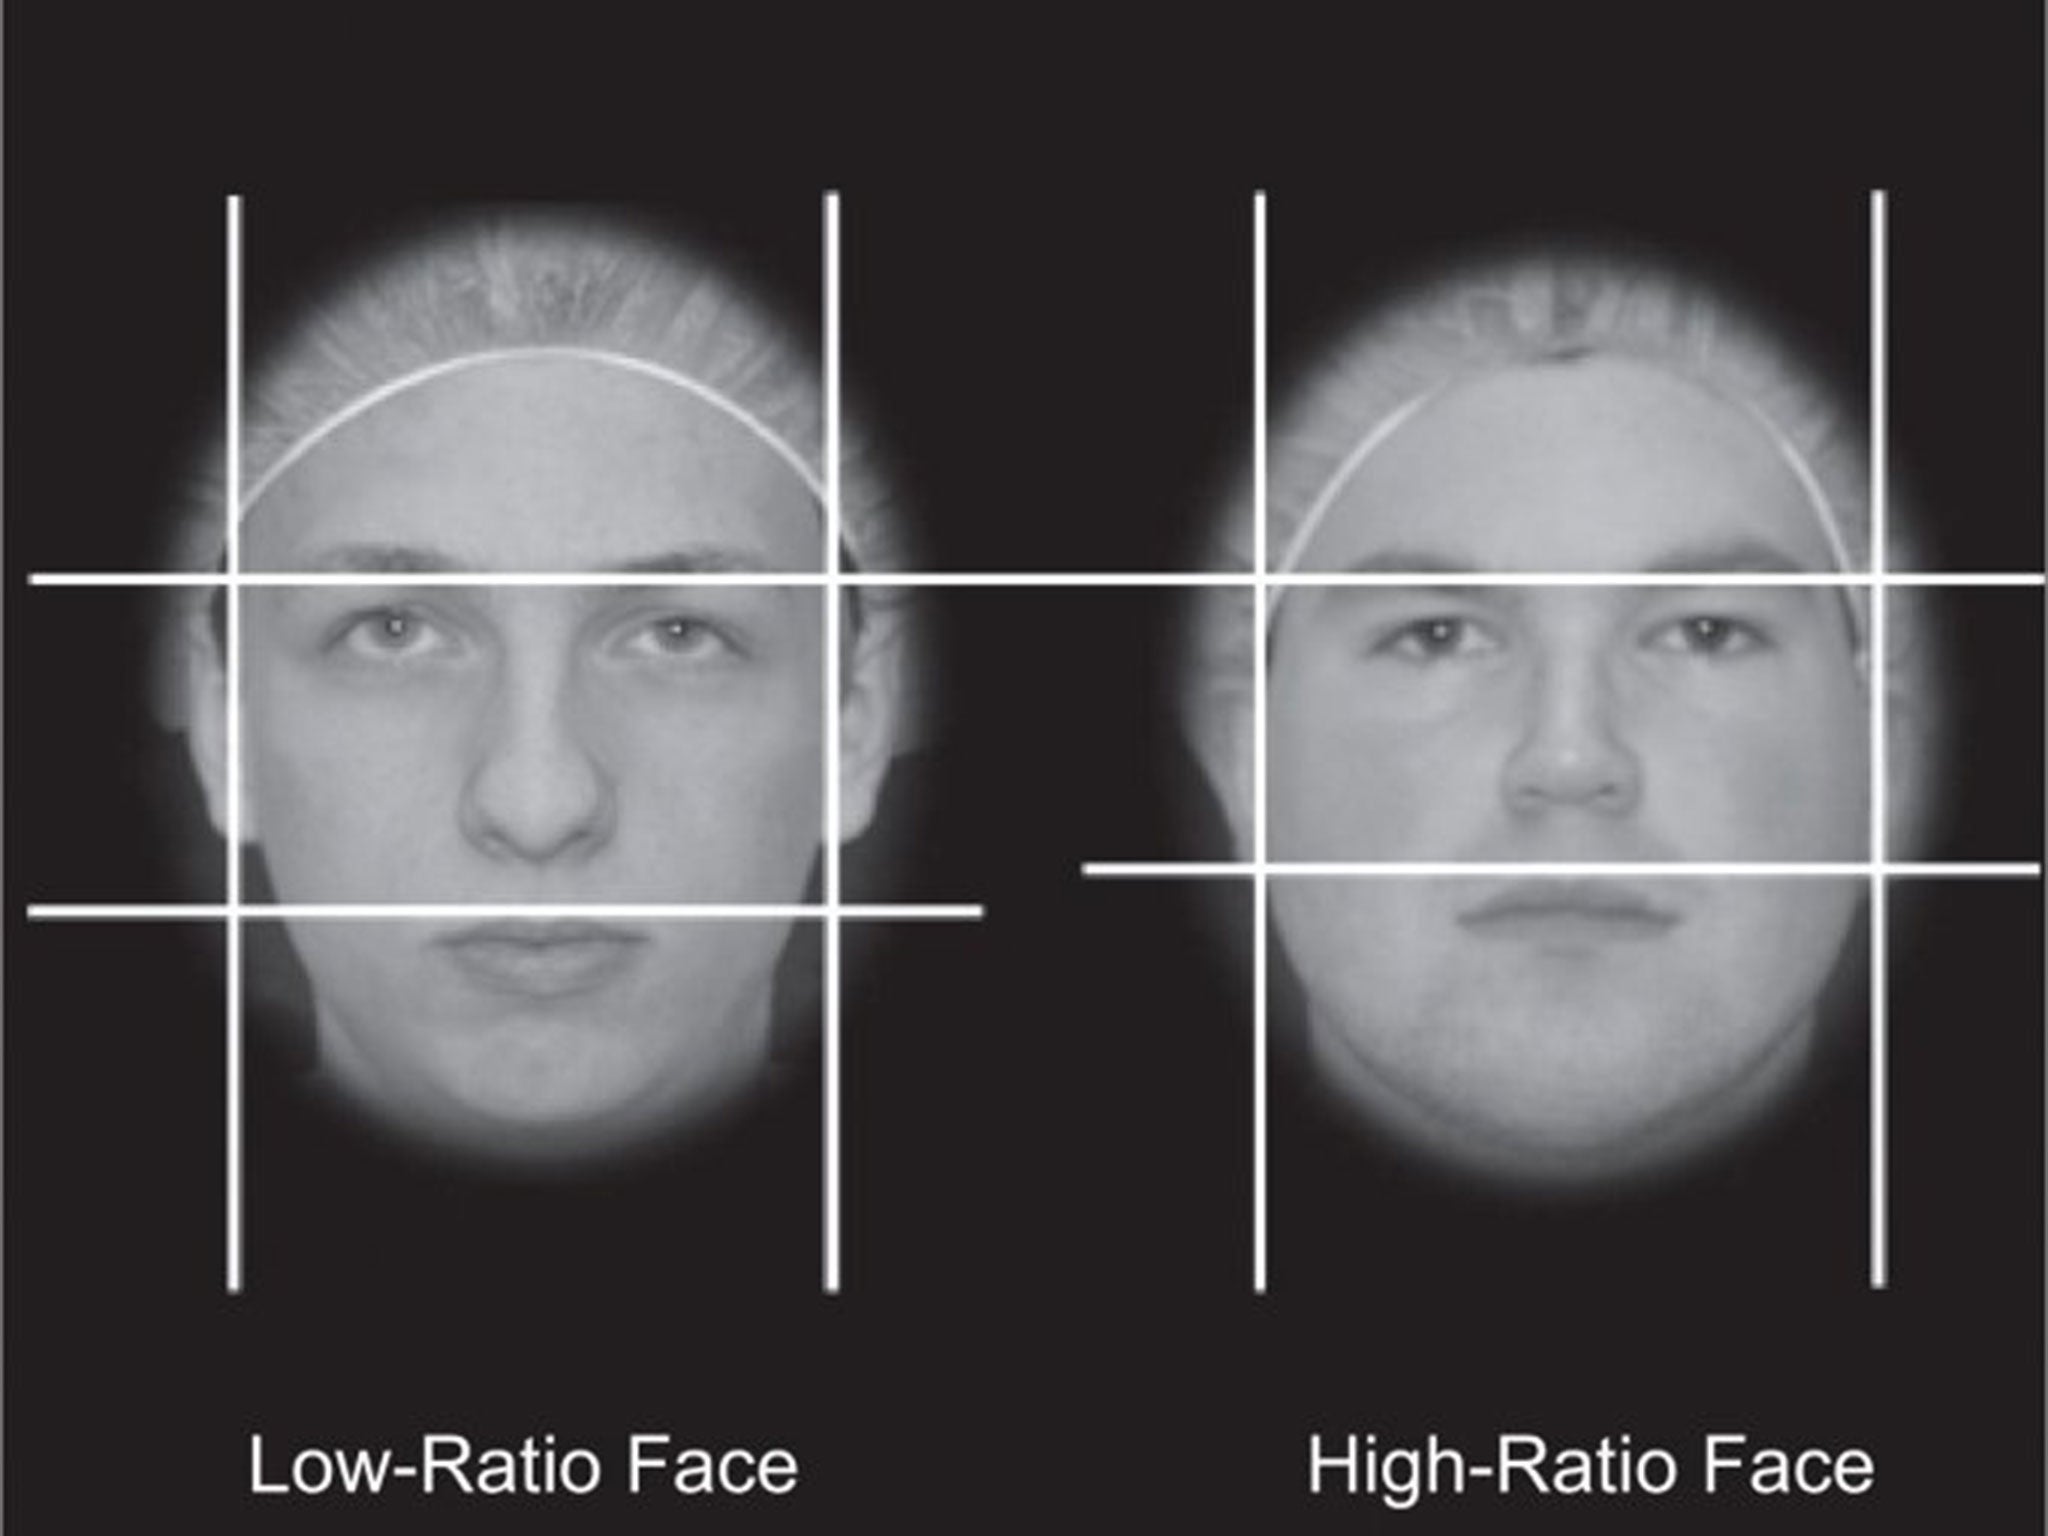 A footballer's facial structure could offer a key insight into how likely he is to score goals and commit fouls, researchers have claimed